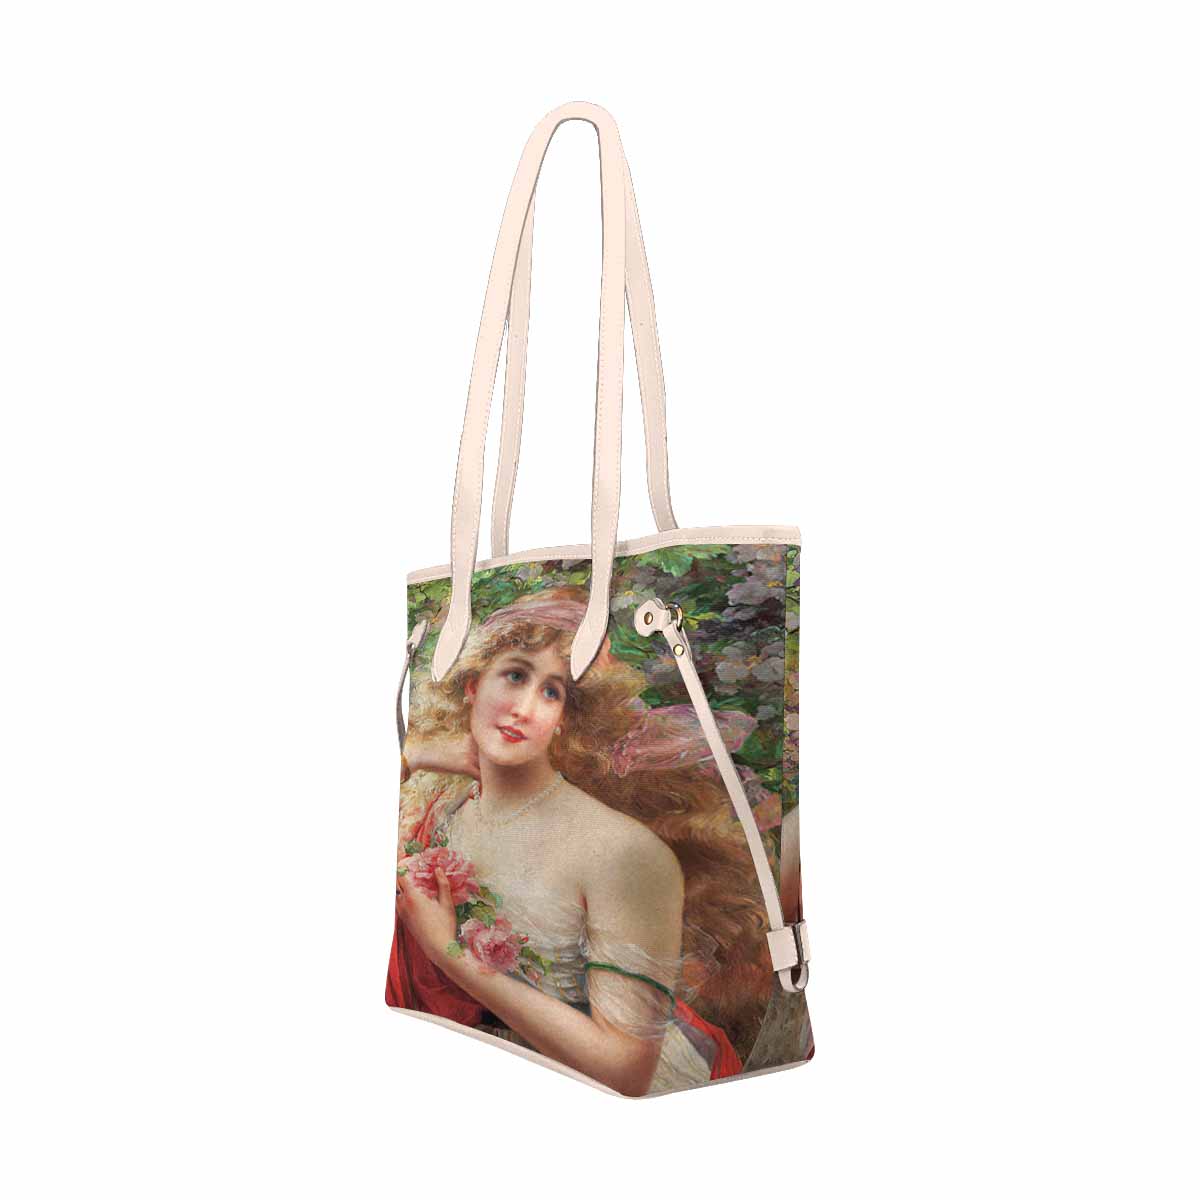 Victorian Lady Design Handbag, Model 1695361, Young Lady With Roses, BEIGE/TAN TRIM